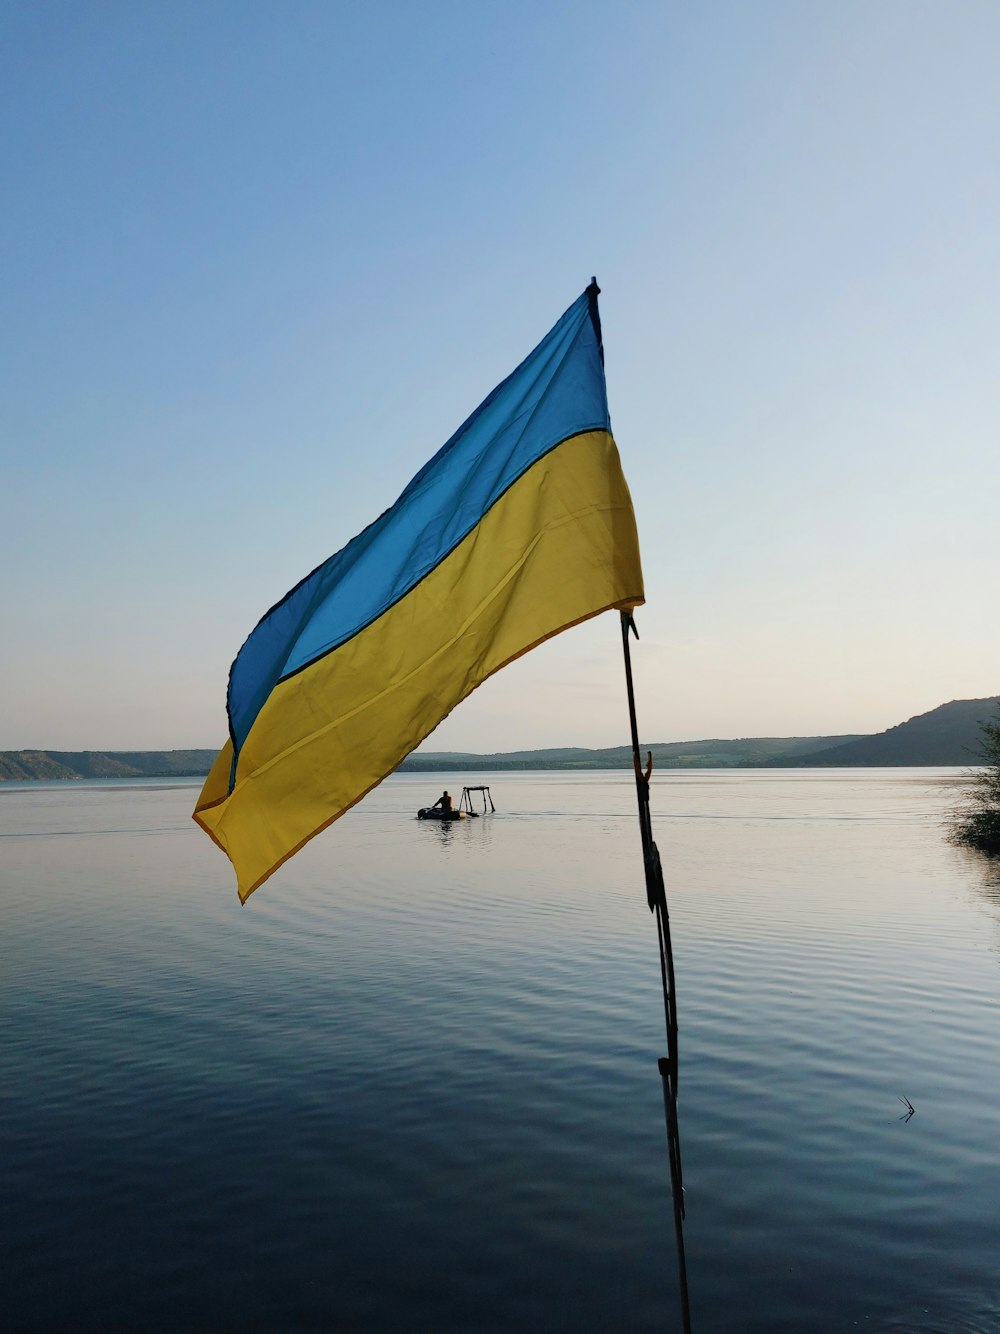 a blue and yellow flag on a pole in the water